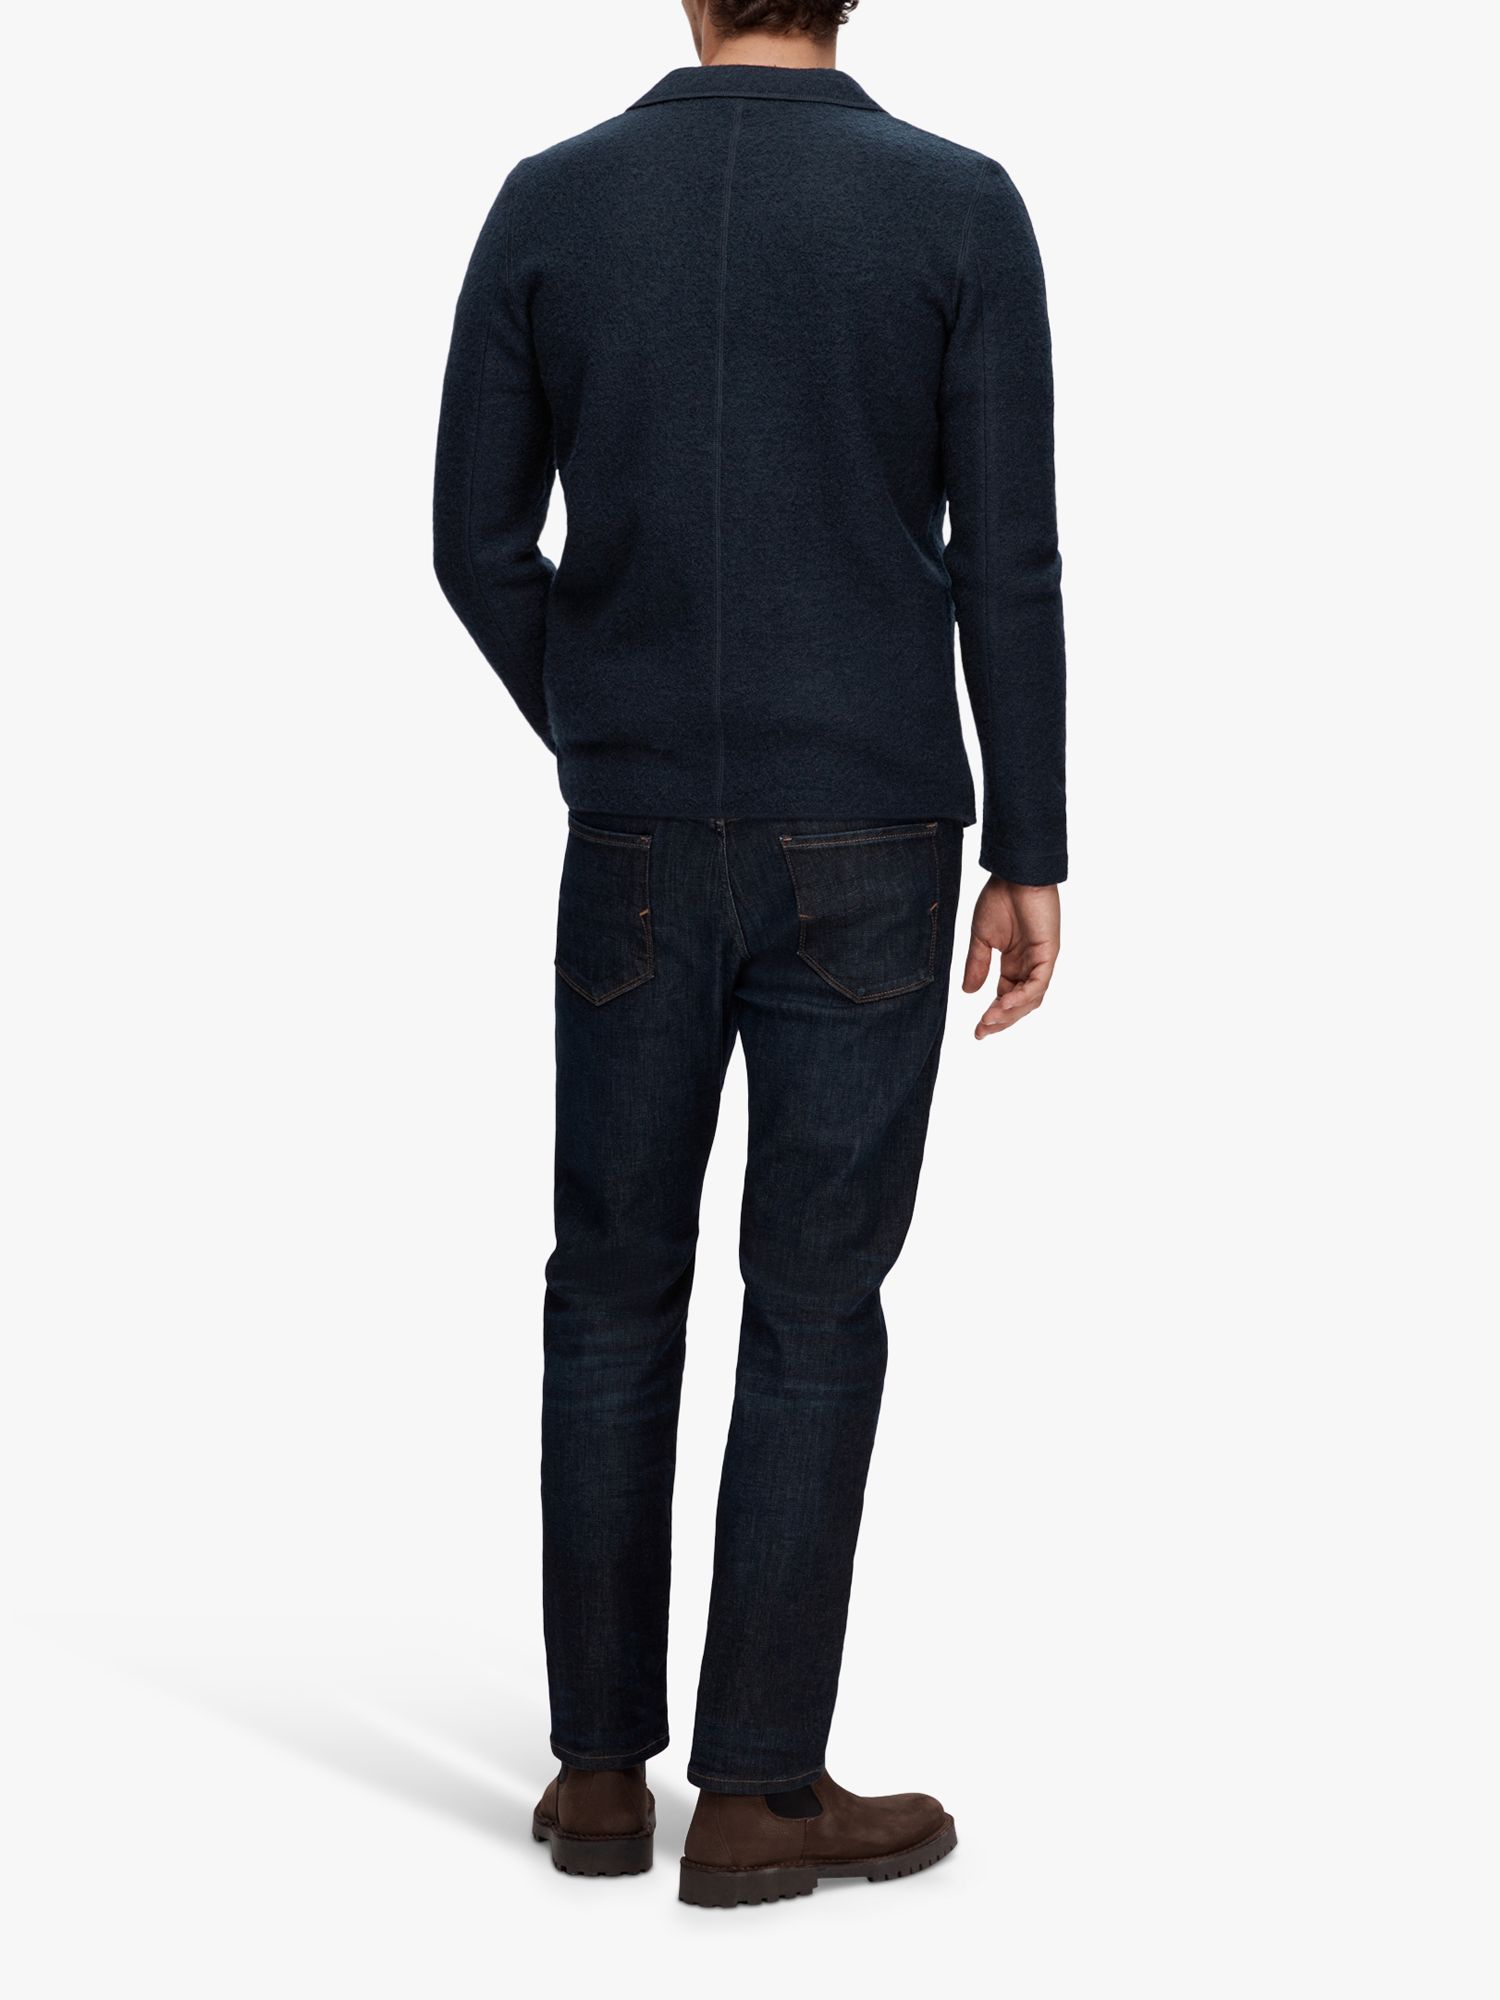 Buy SELECTED HOMME Nealy Knit Blazer Cardigan, Sky Captain Online at johnlewis.com